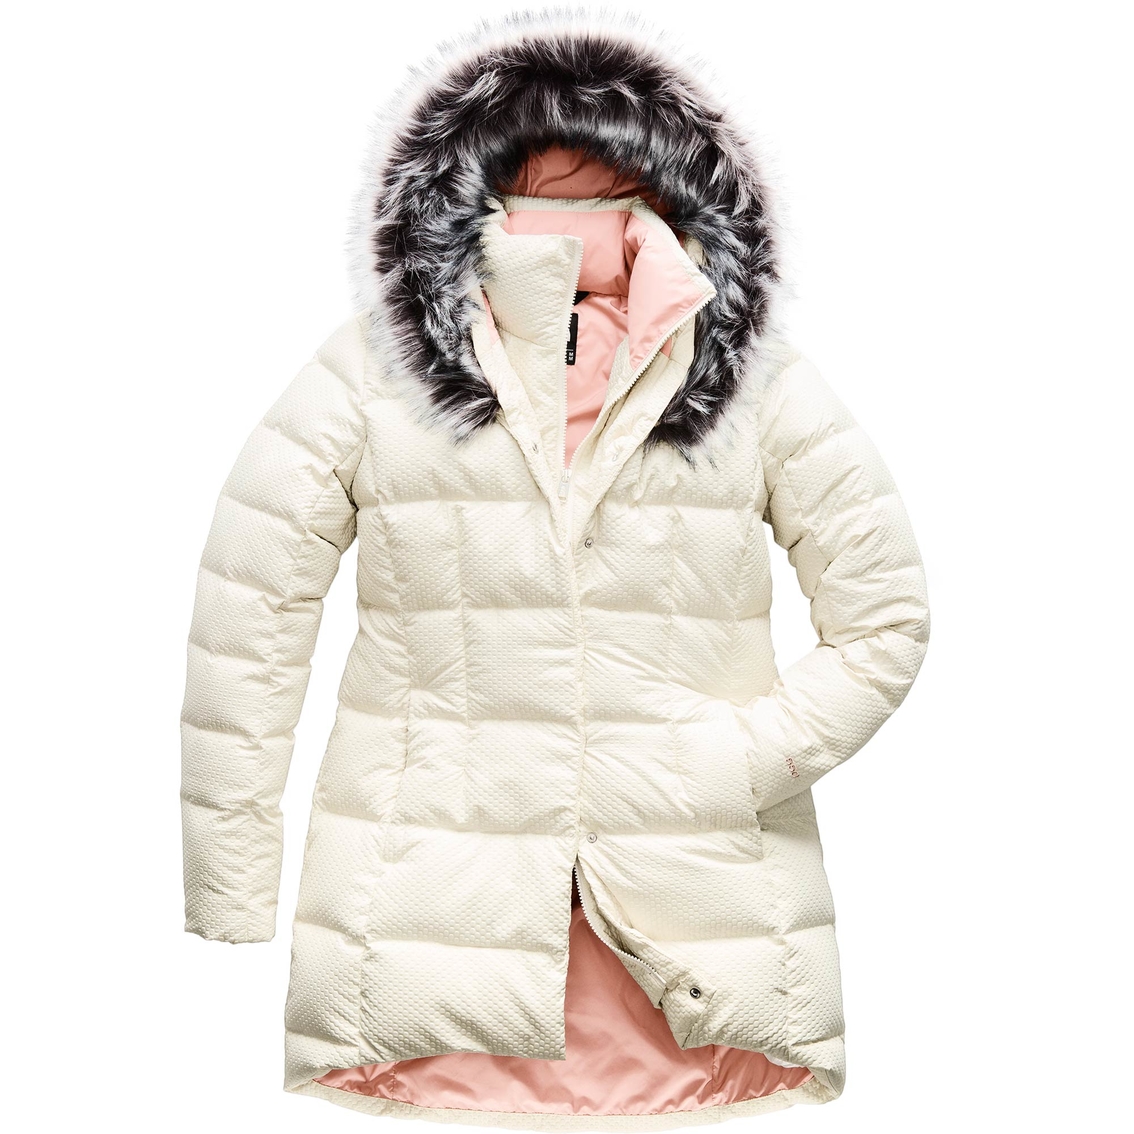 hey mama north face jacket Online 